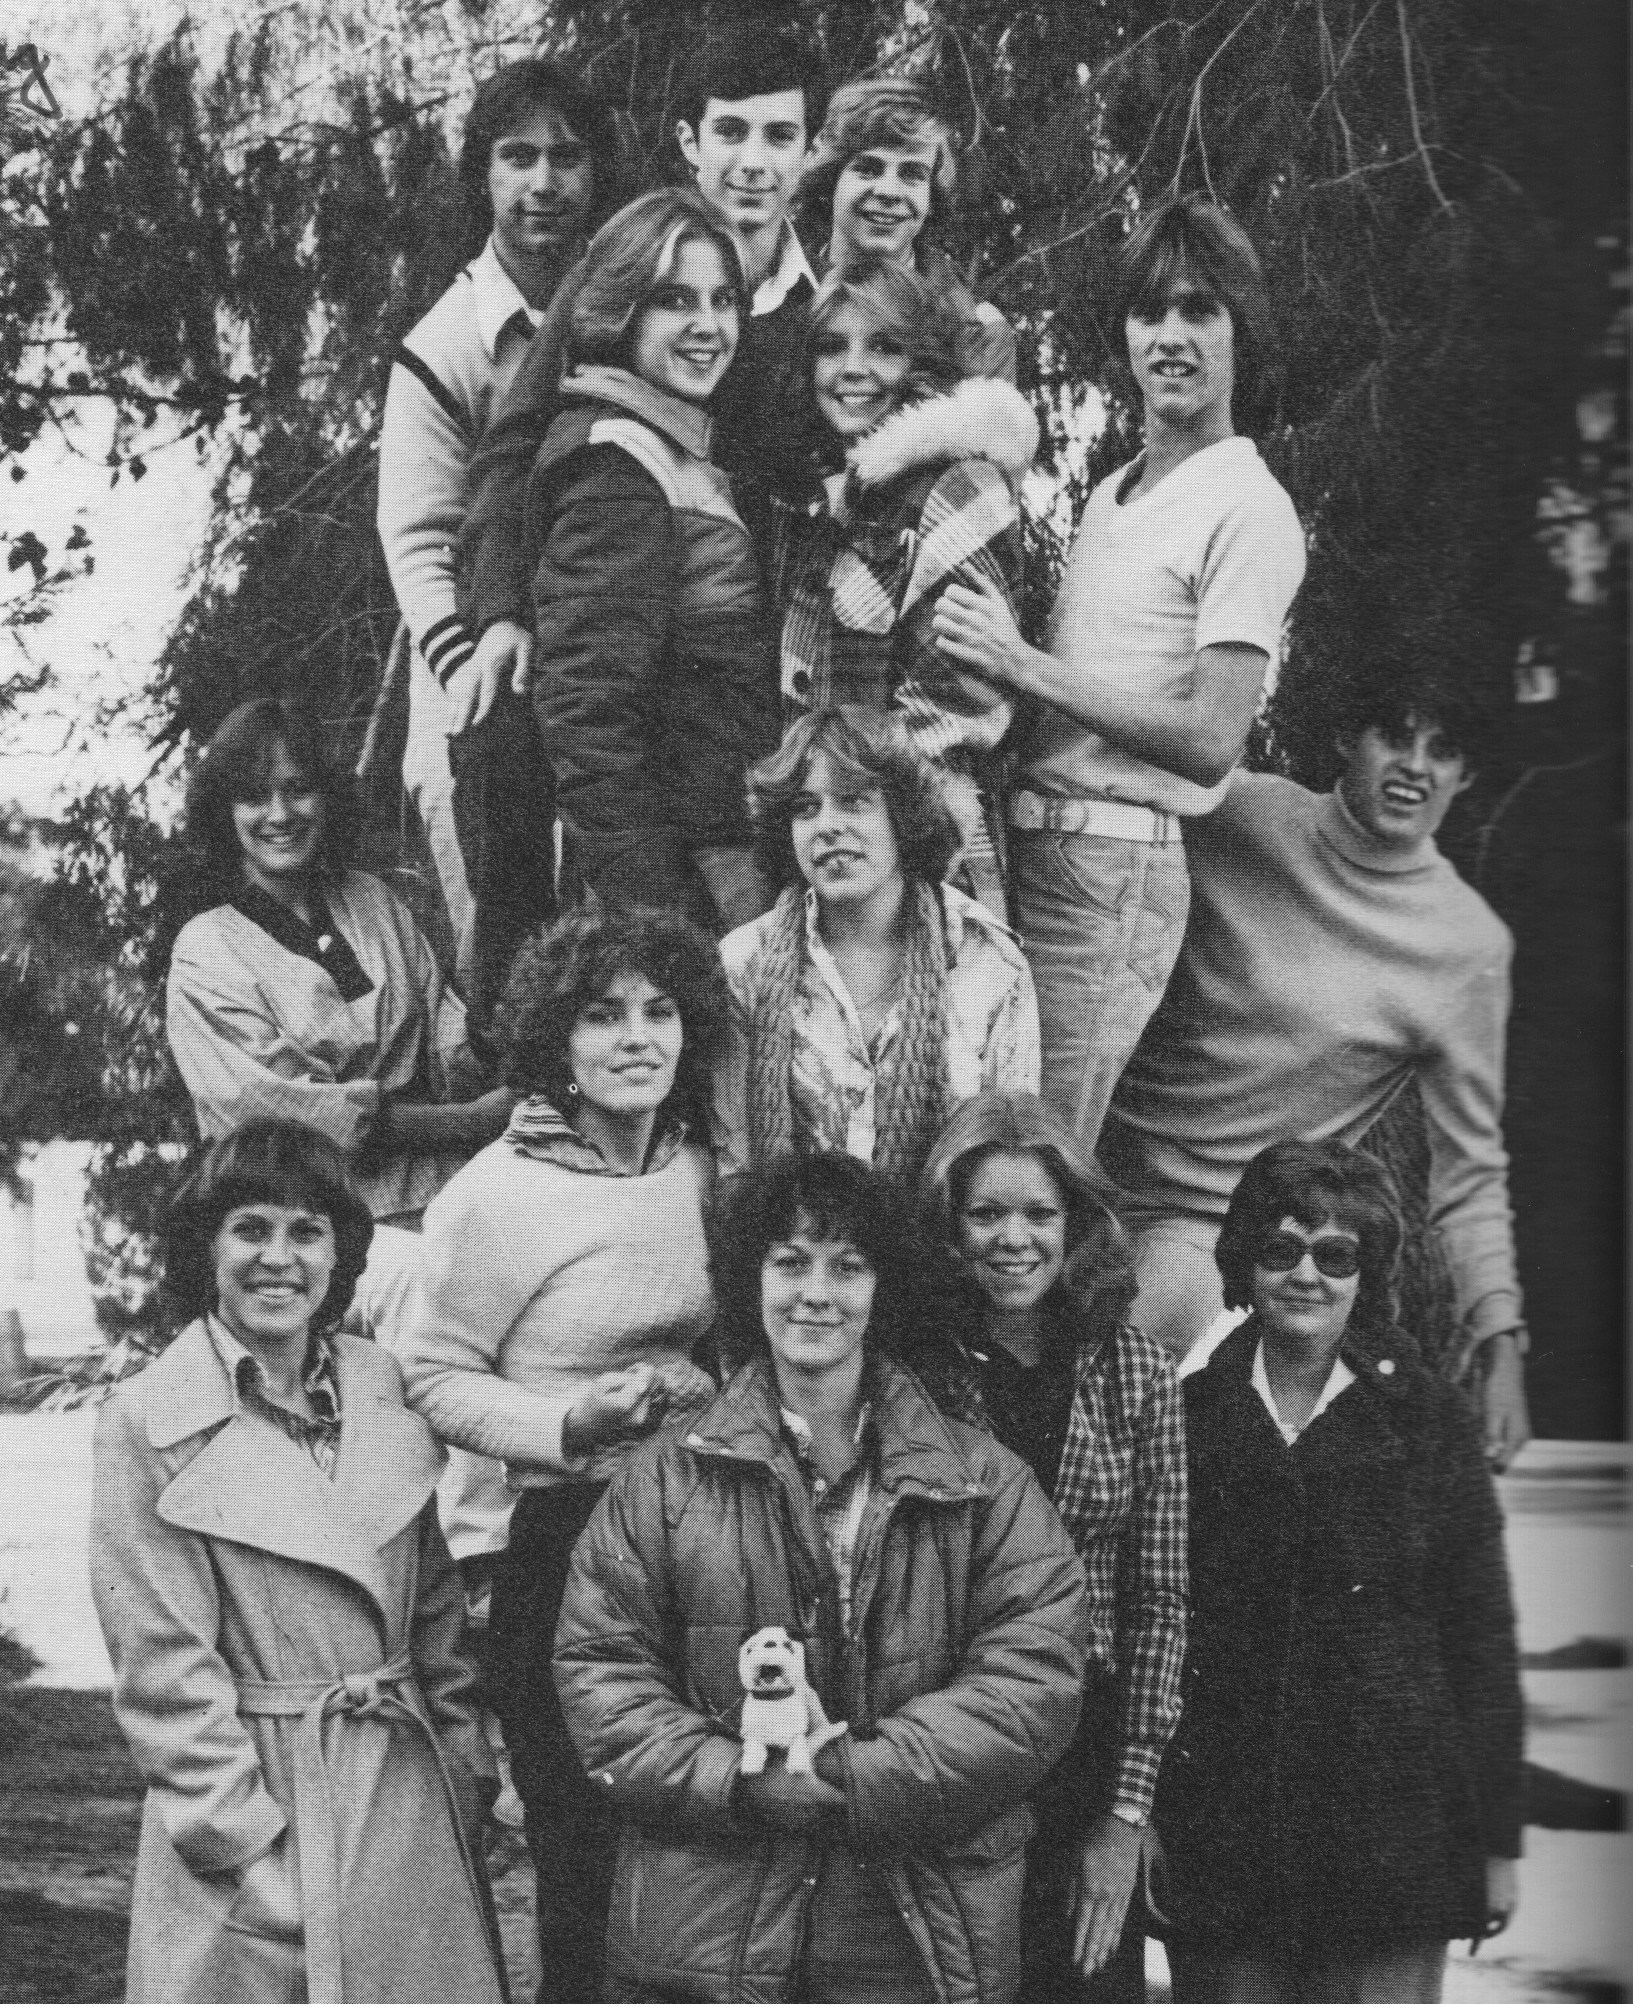 One of the few photos I have with Miss Goehring and I together in the same photo, along with our 1979 thespian group. I'm in the turtle neck on the opposite side.